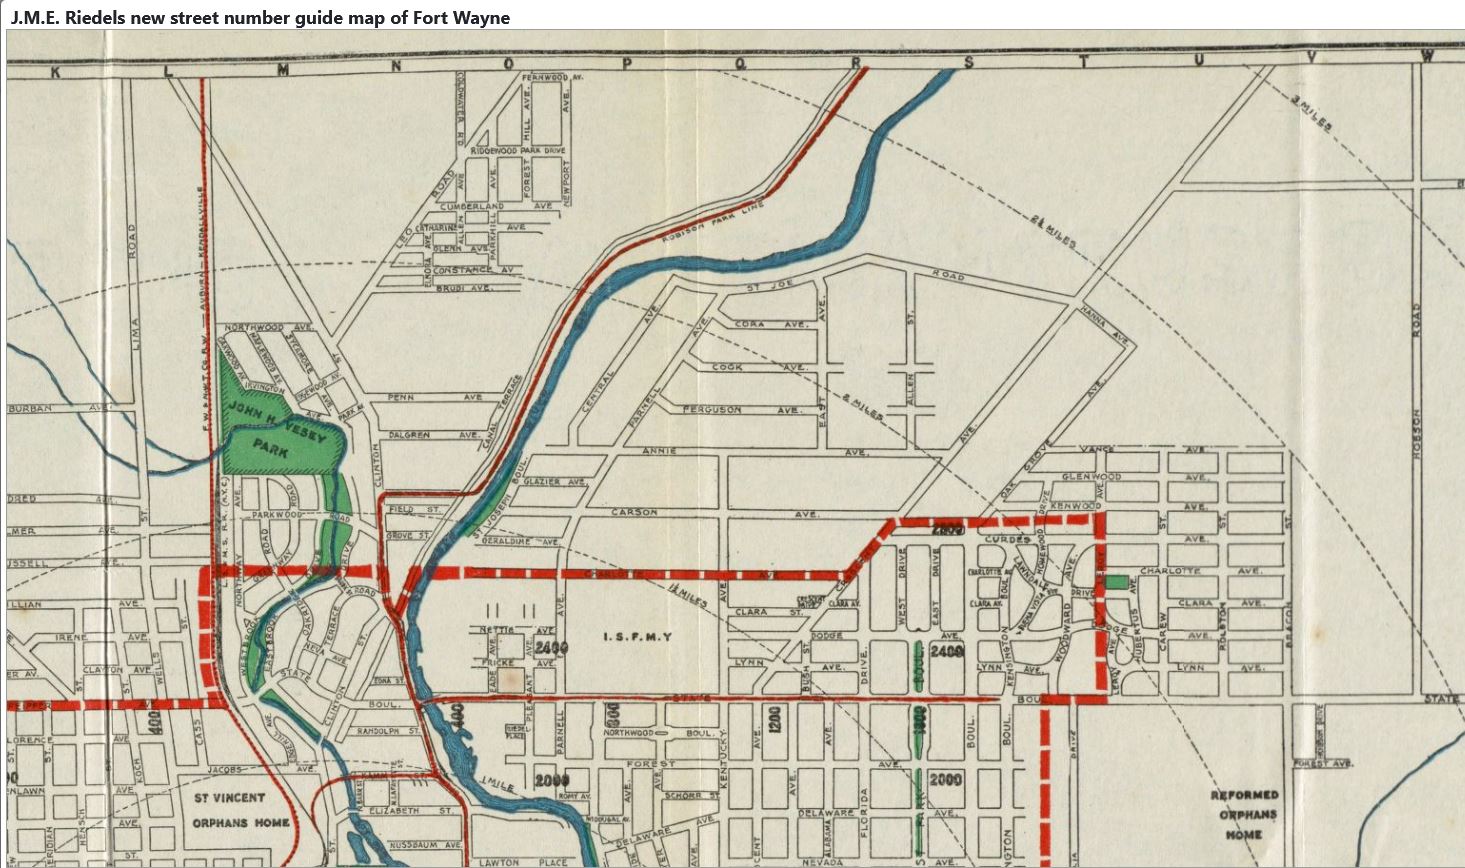 1919 J.M.E. Riedel's new street number guide map of Fort Wayne</